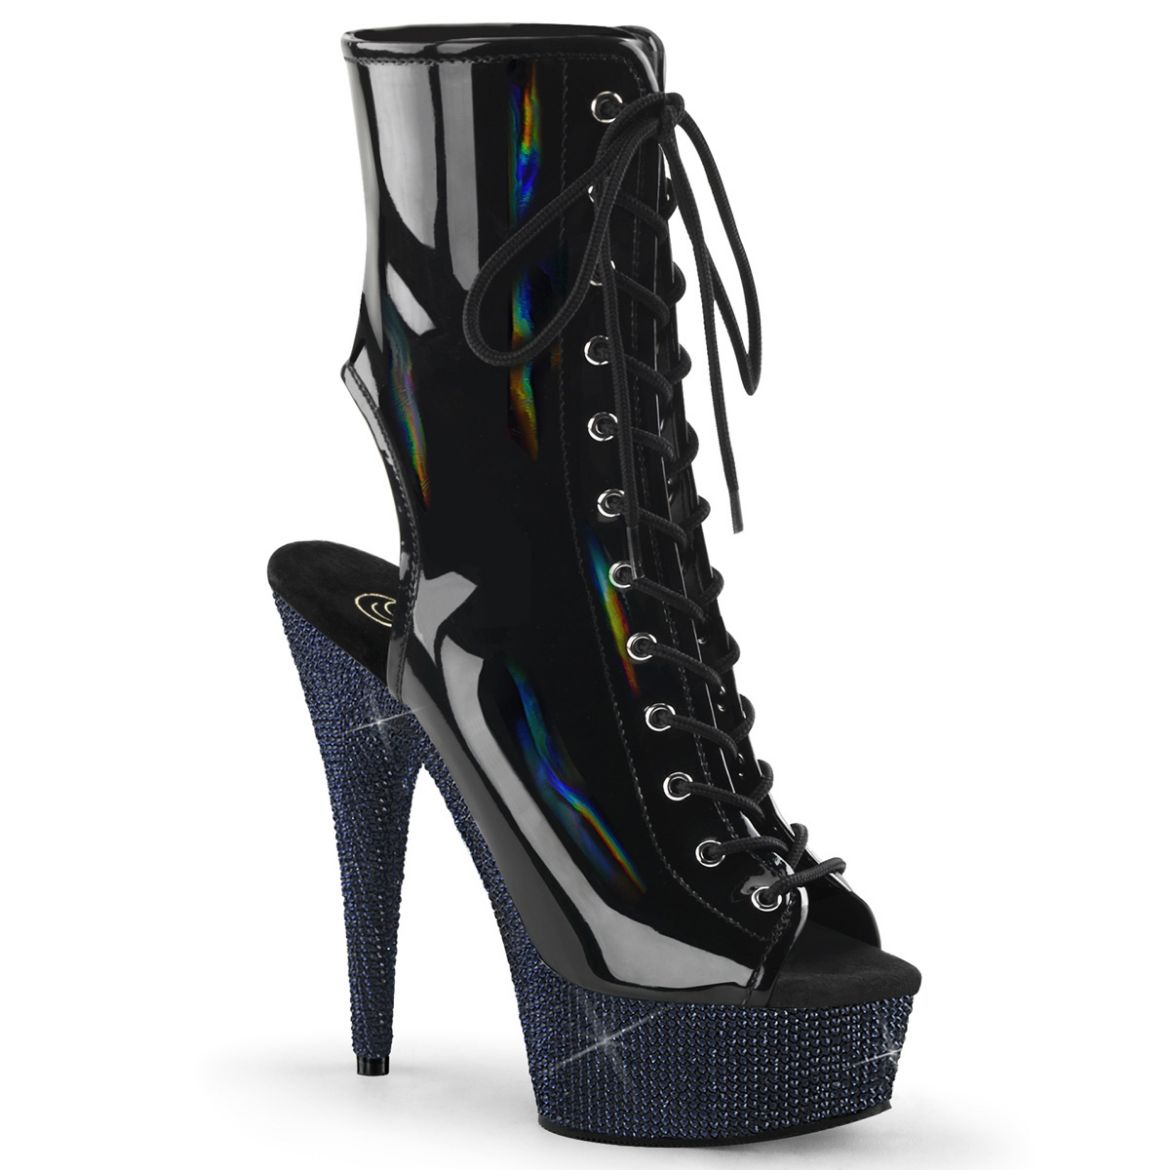 Product image of Pleaser BEJEWELED-1016-6 Blk Holo Pat/Midnight Blk RS 6 Inch Heel 1 3/4 Inch PF Open Toe/Heel Lace-Up Ankle Boot wRS